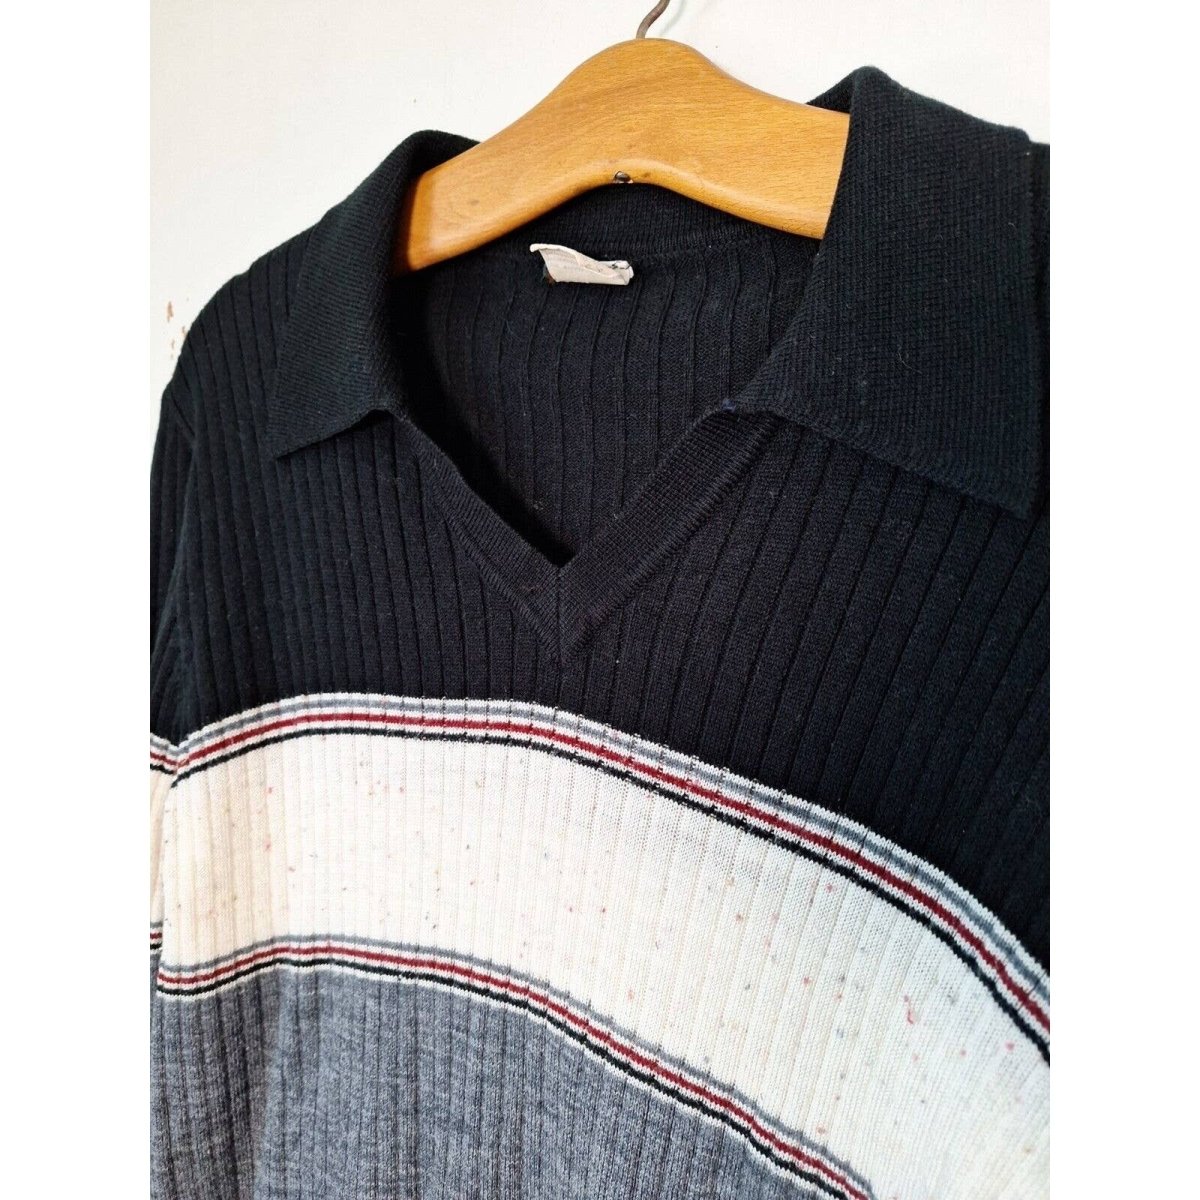 Vintage 70s Striped Ribbed Knit Collared Sweater Size Women Medium - themallvintage The Mall Vintage